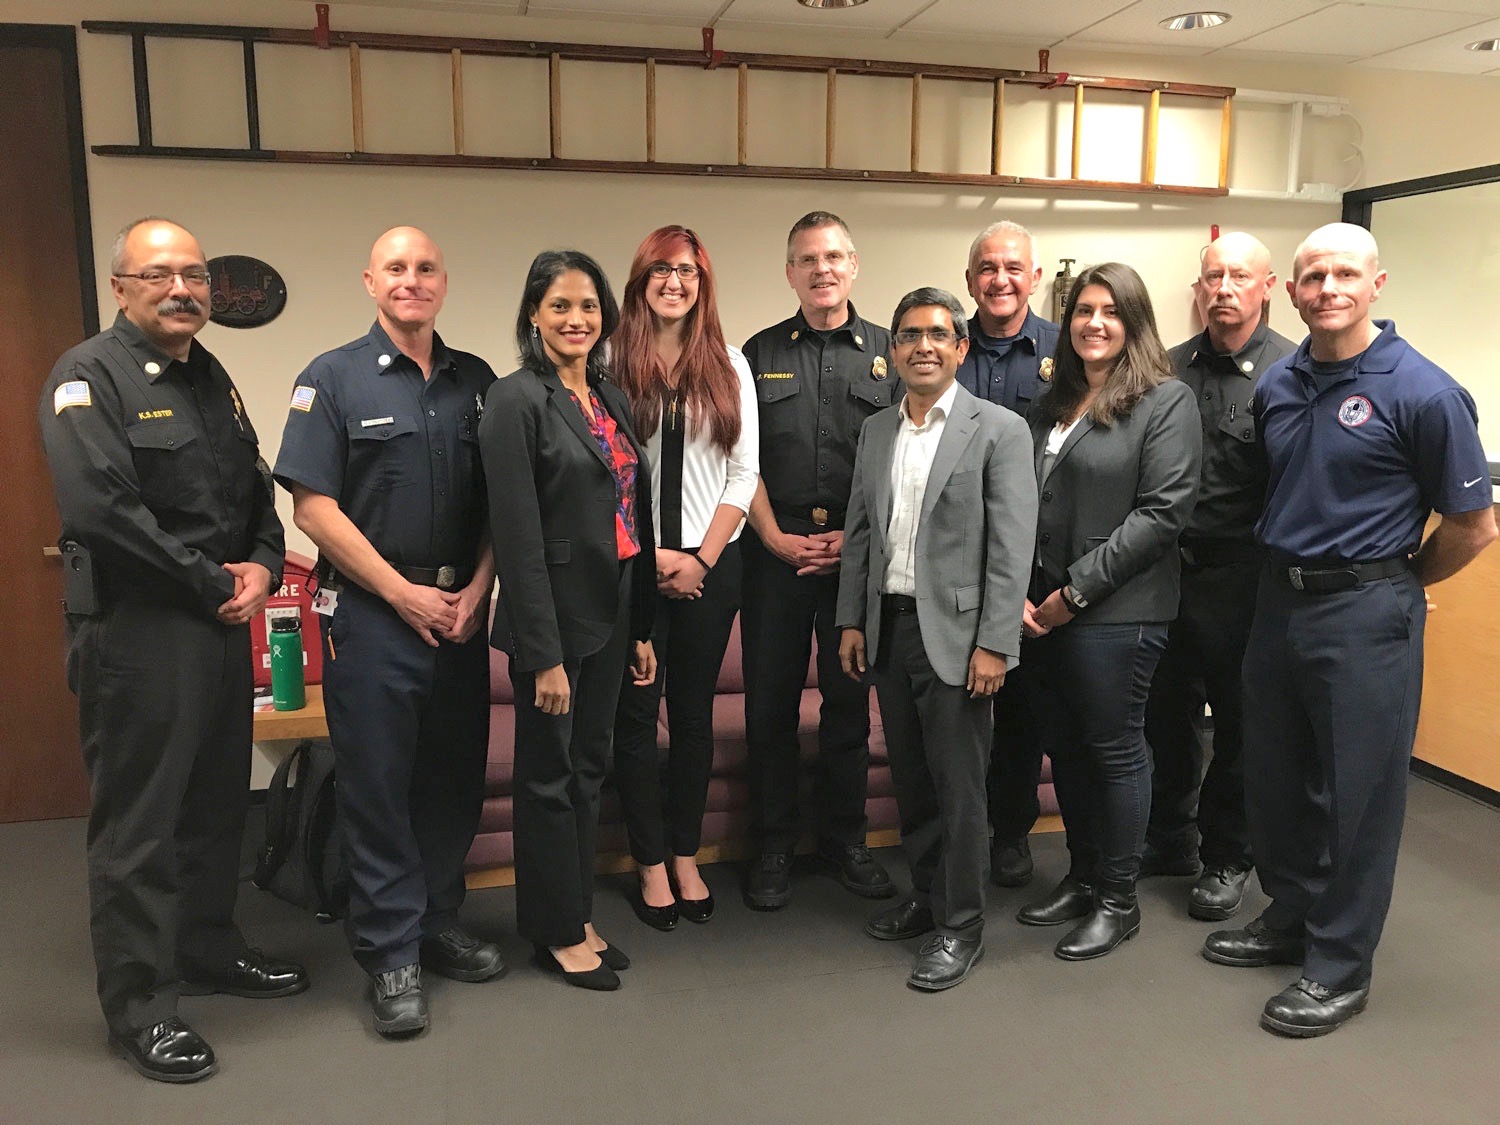 From left, members of the Salk-UCSD-SDFD firefighter wellness study: Kevin Ester, John Cerruto, Pam Taub, Adena Zadourian, Brian Fennessy, Satchidananda Panda, David Picone, Emily Manoogian, Chris Webber and Kurtis Bennett. (Credit: San Diego Fire-Rescue Department)